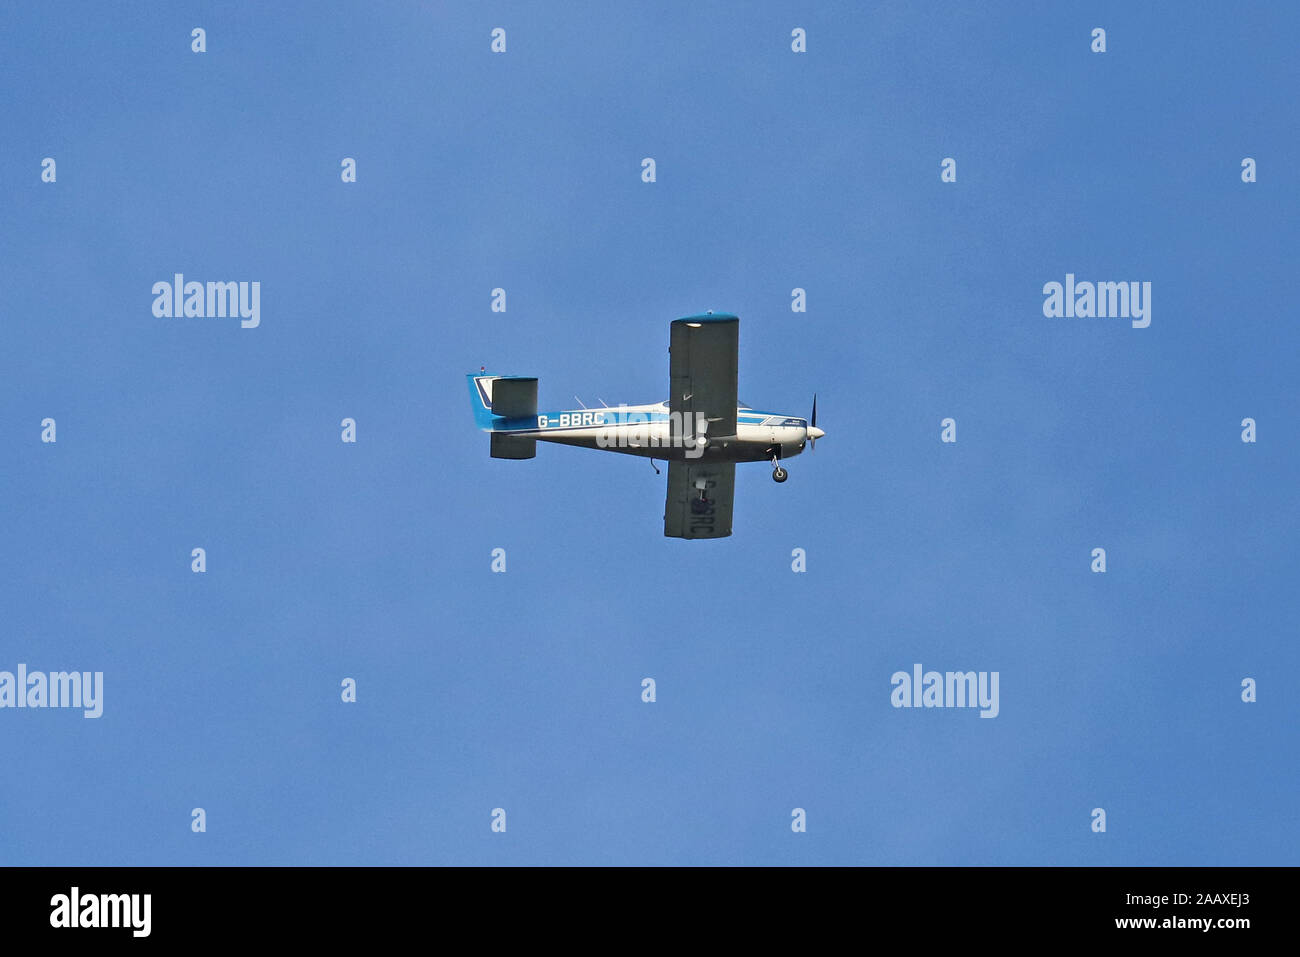 Fuji FA-200-180 a single engined light aircraft G-BBRC flying overhead, set against a blue sky background. Stock Photo